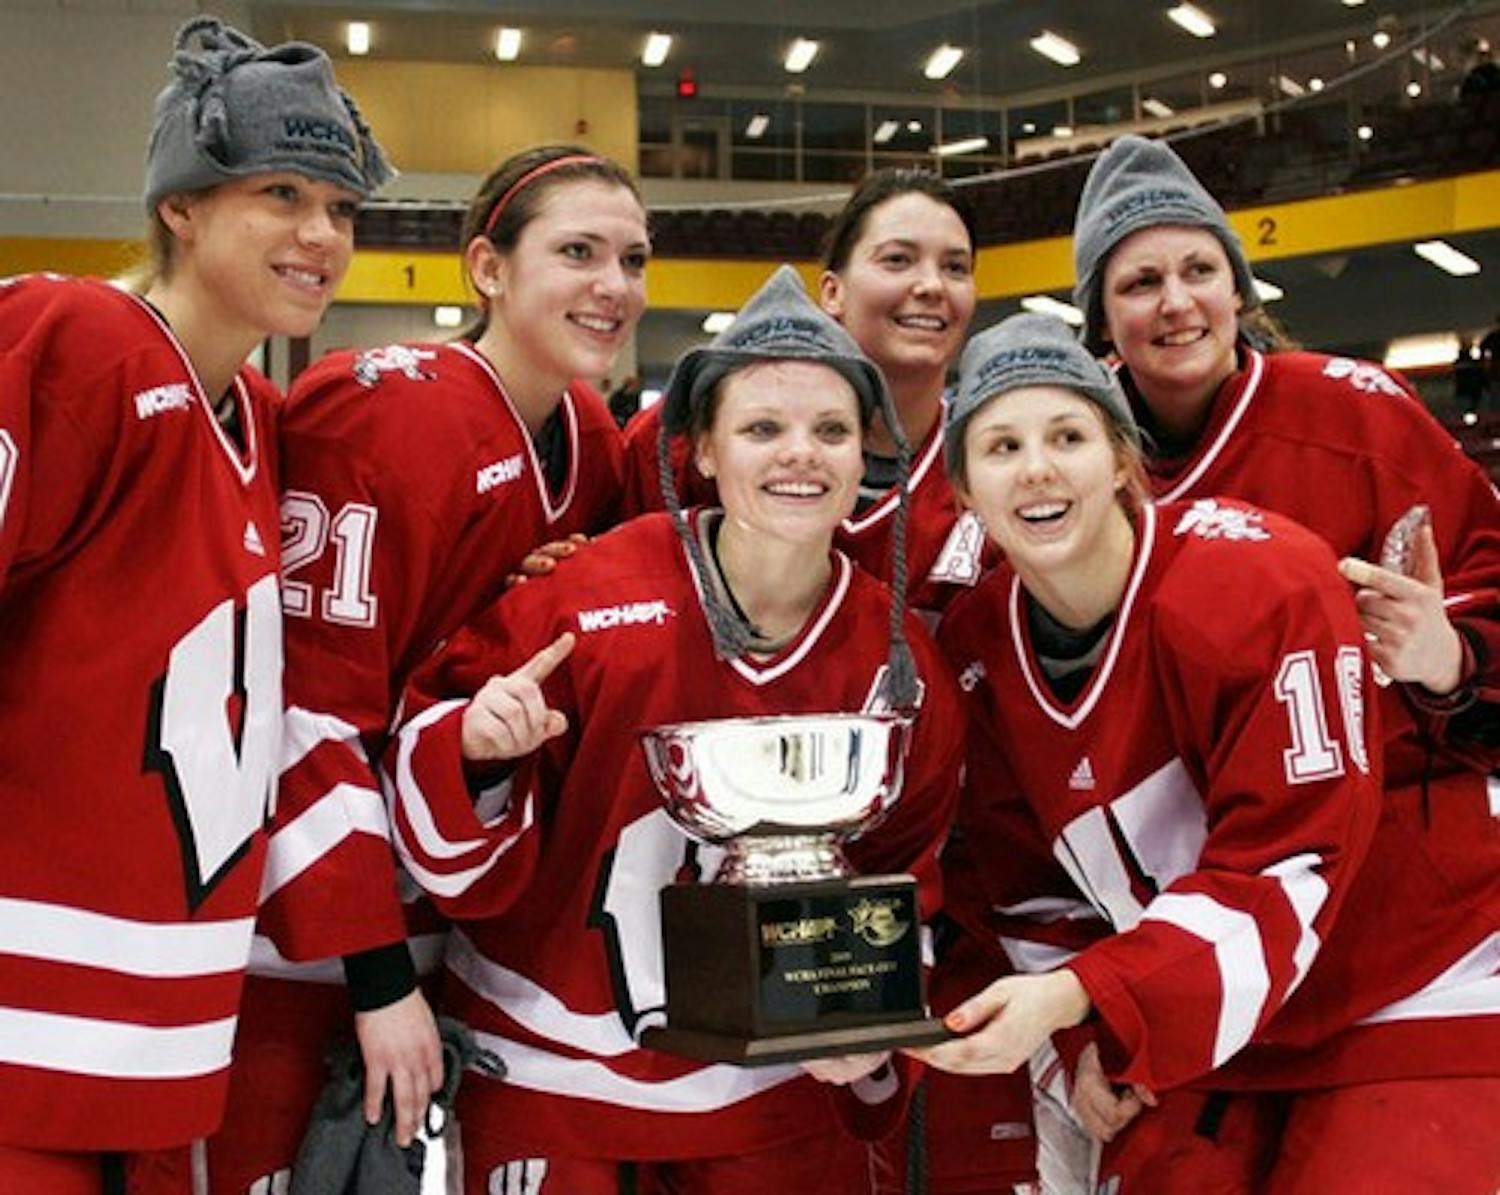 Wisconsin earns third WCHA championship title over weekend